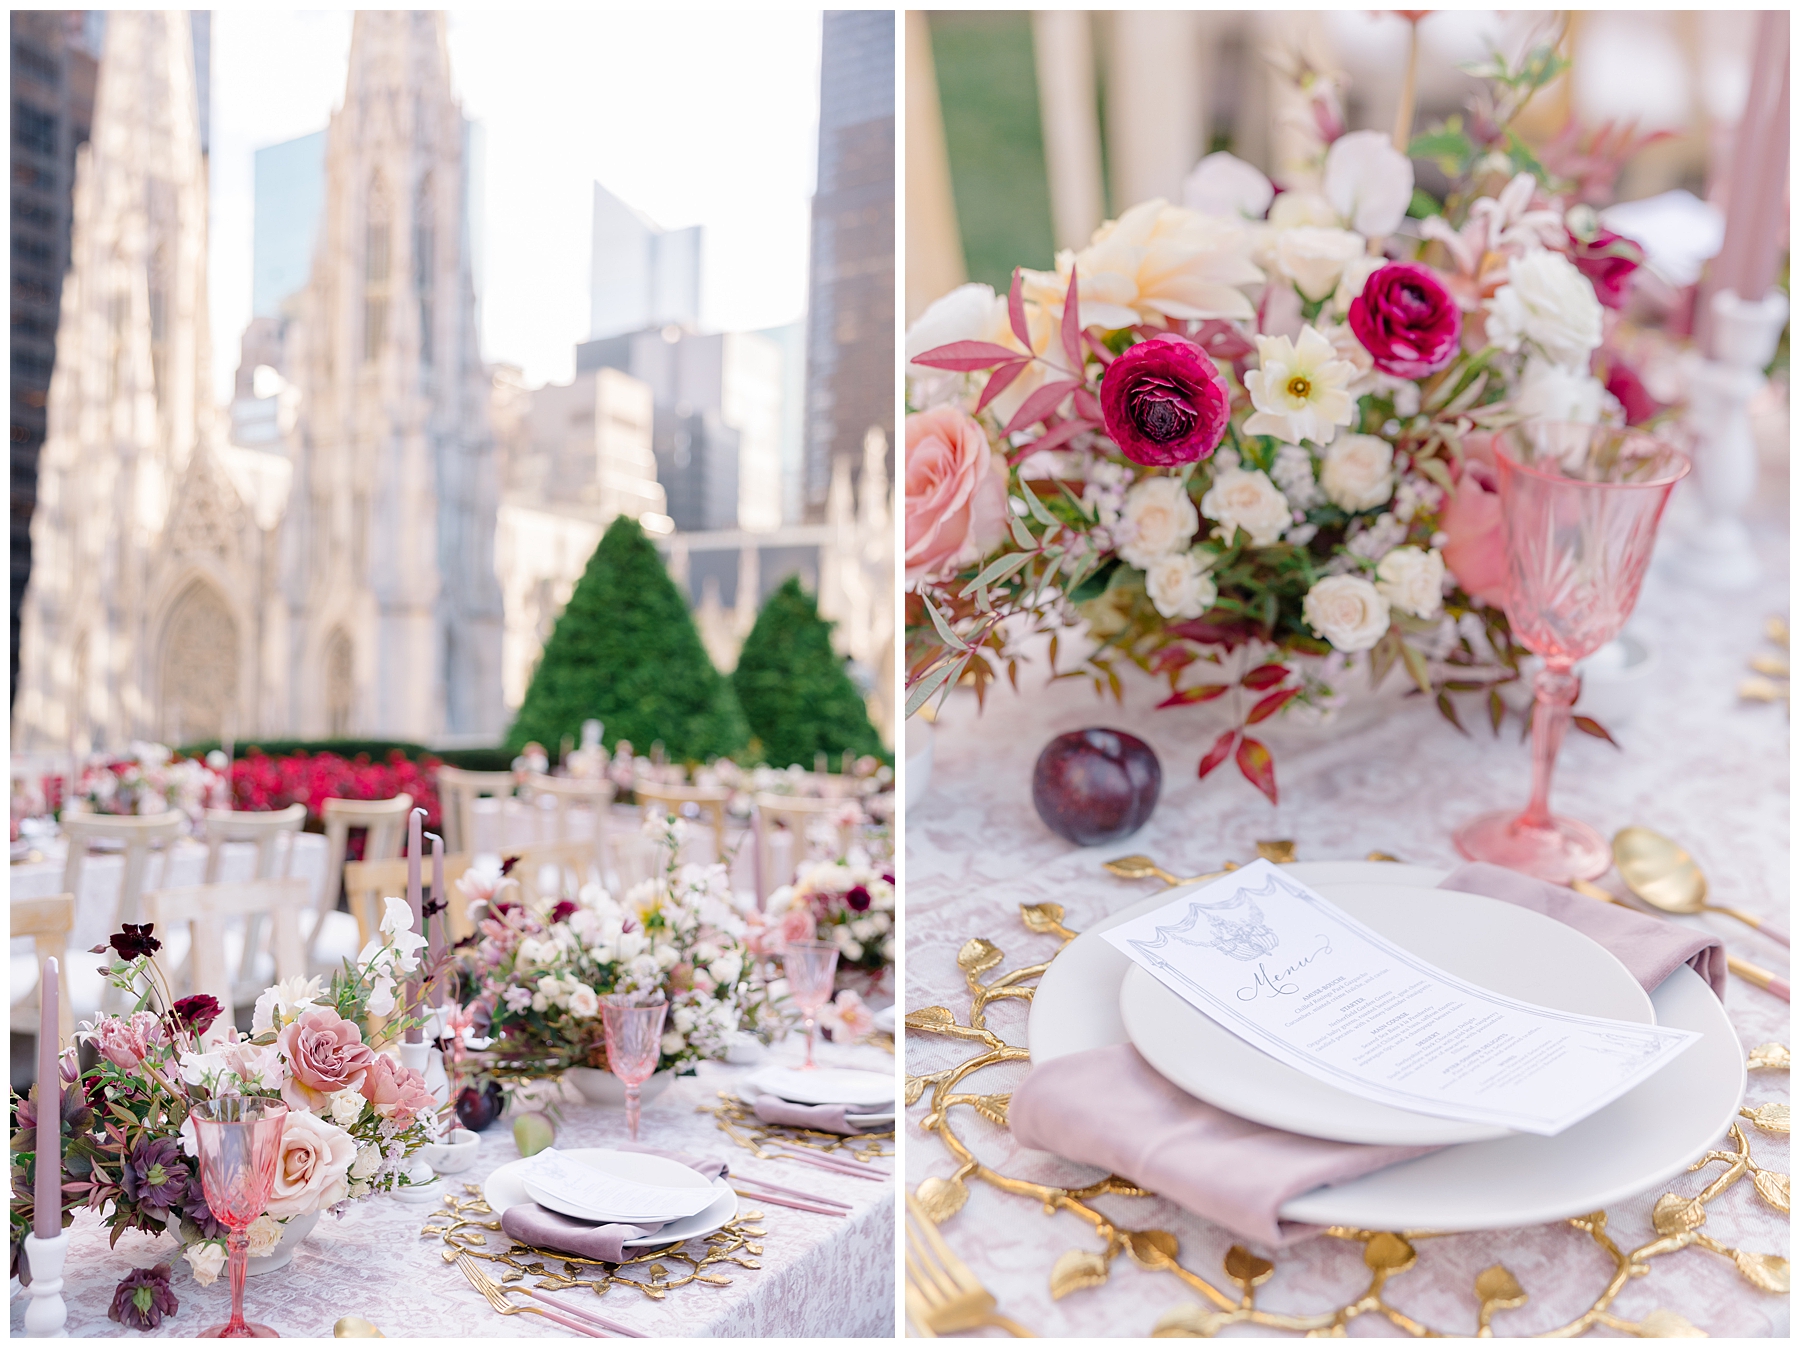 Romantic reception details at 620 Loft and Garden Wedding in New York City